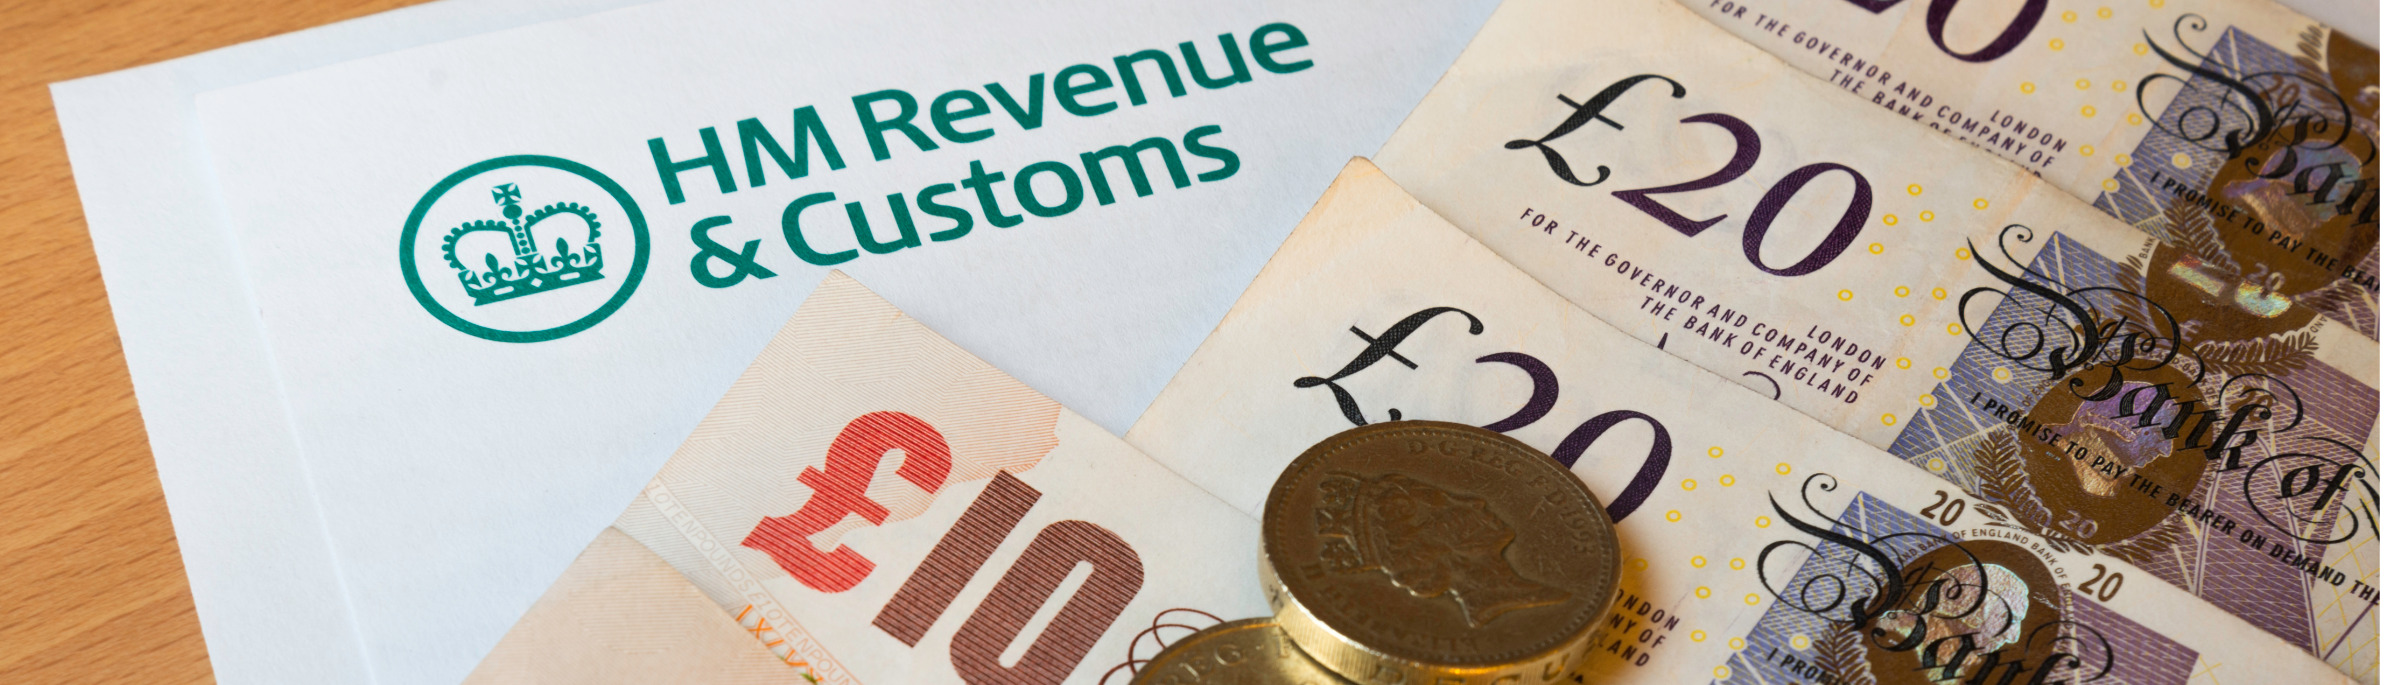 hmrc-tax-investigations-call-us-on-020-8168-1680-for-your-free